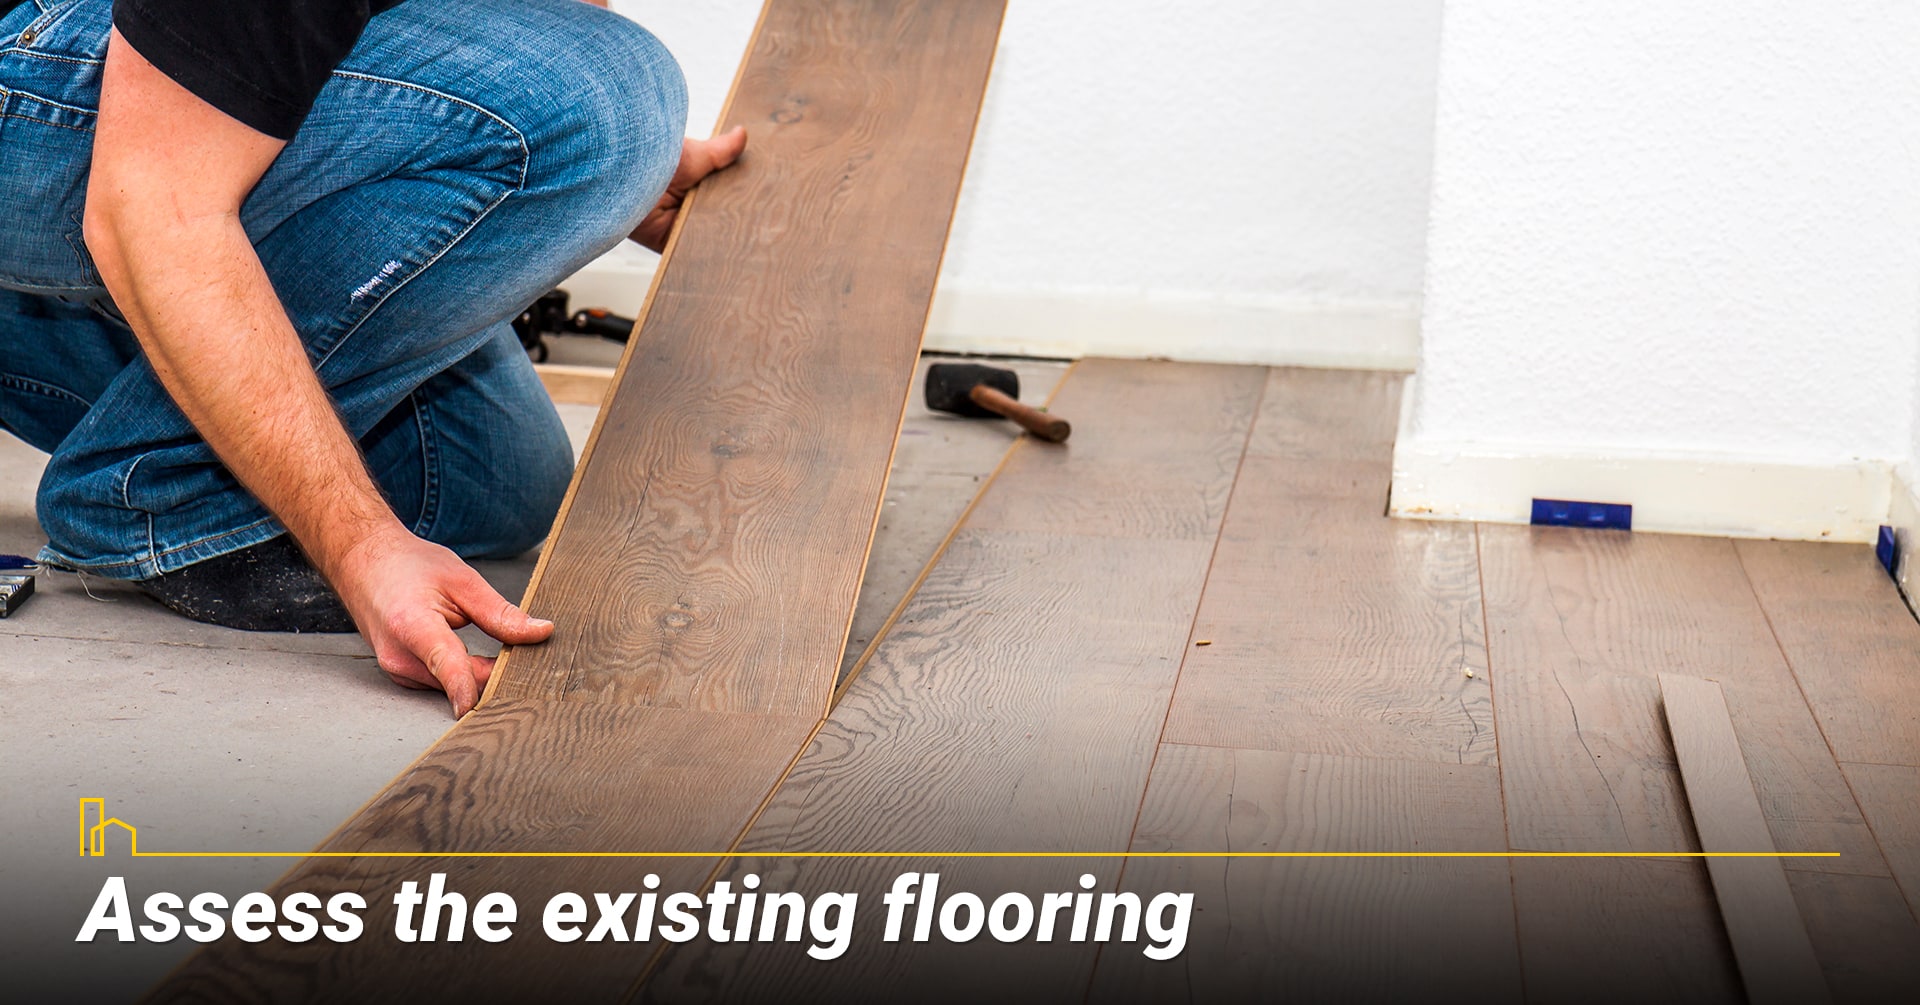 Assess the existing flooring